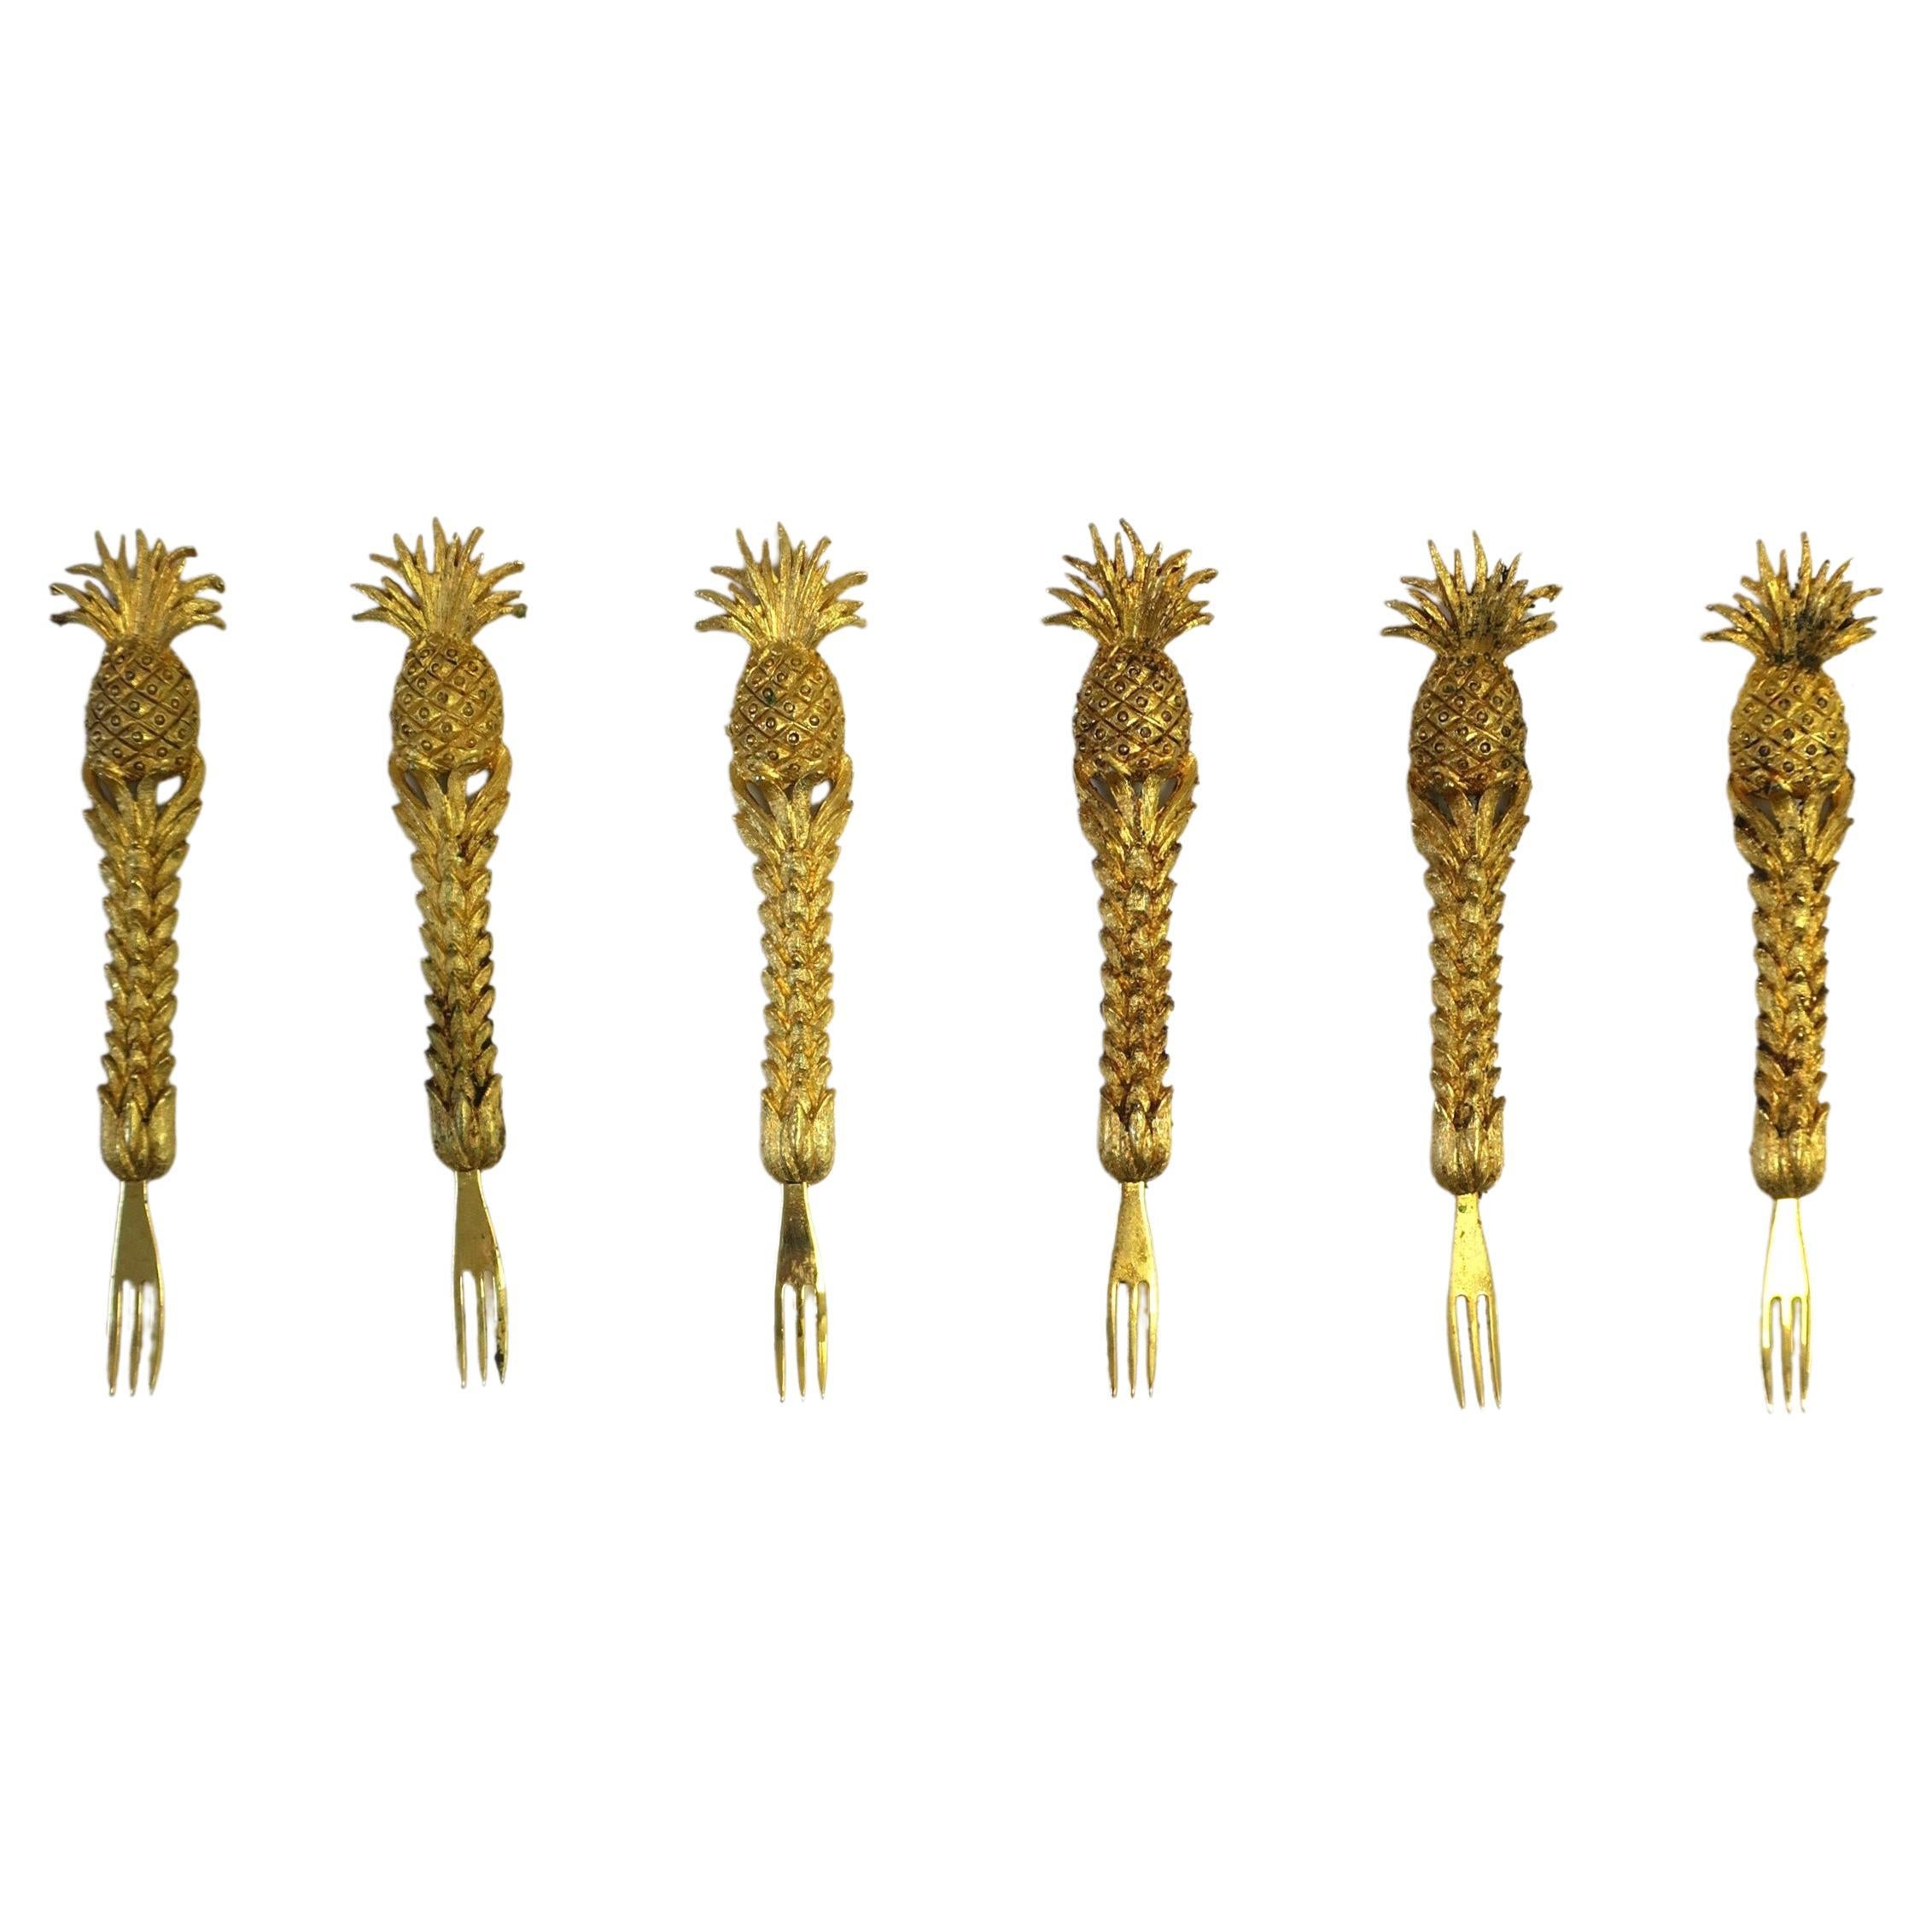 Gold Plated Appetizer Canapé Hor D'oeuvres Forks with Pineapple Design, 1960s For Sale